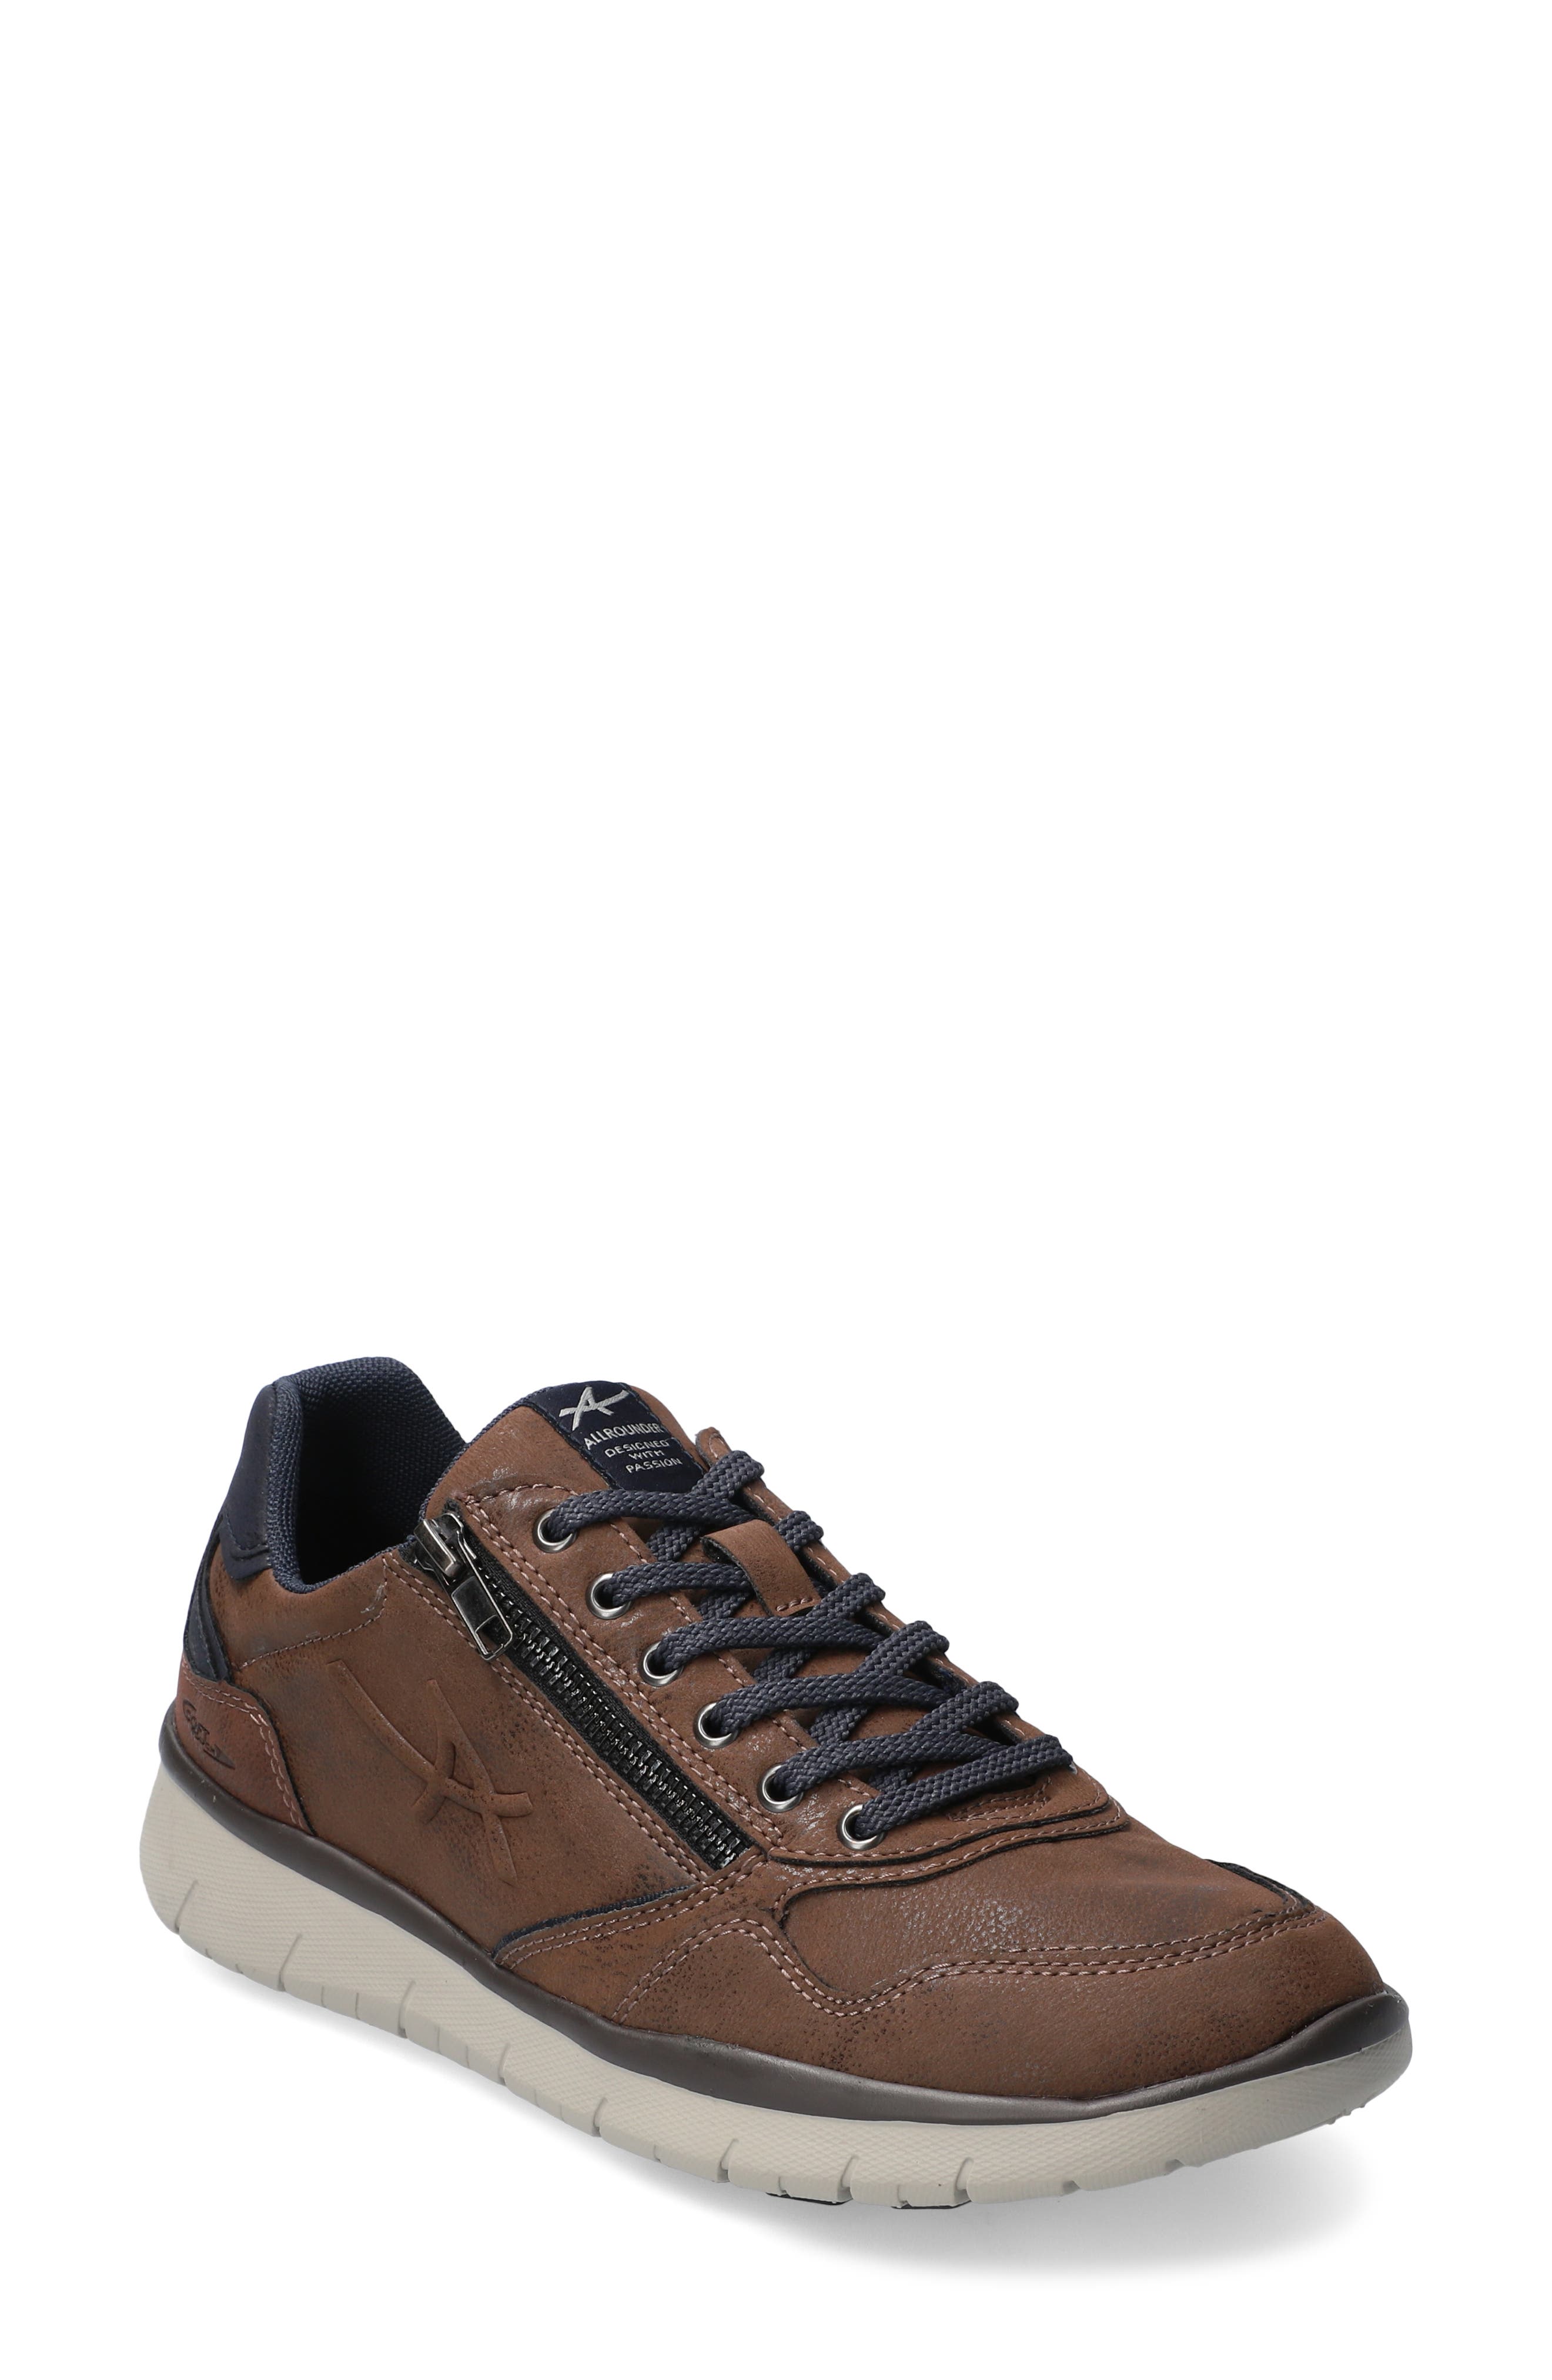 Allrounder by Mephisto Majestro Sneaker in Dress Blue at Nordstrom